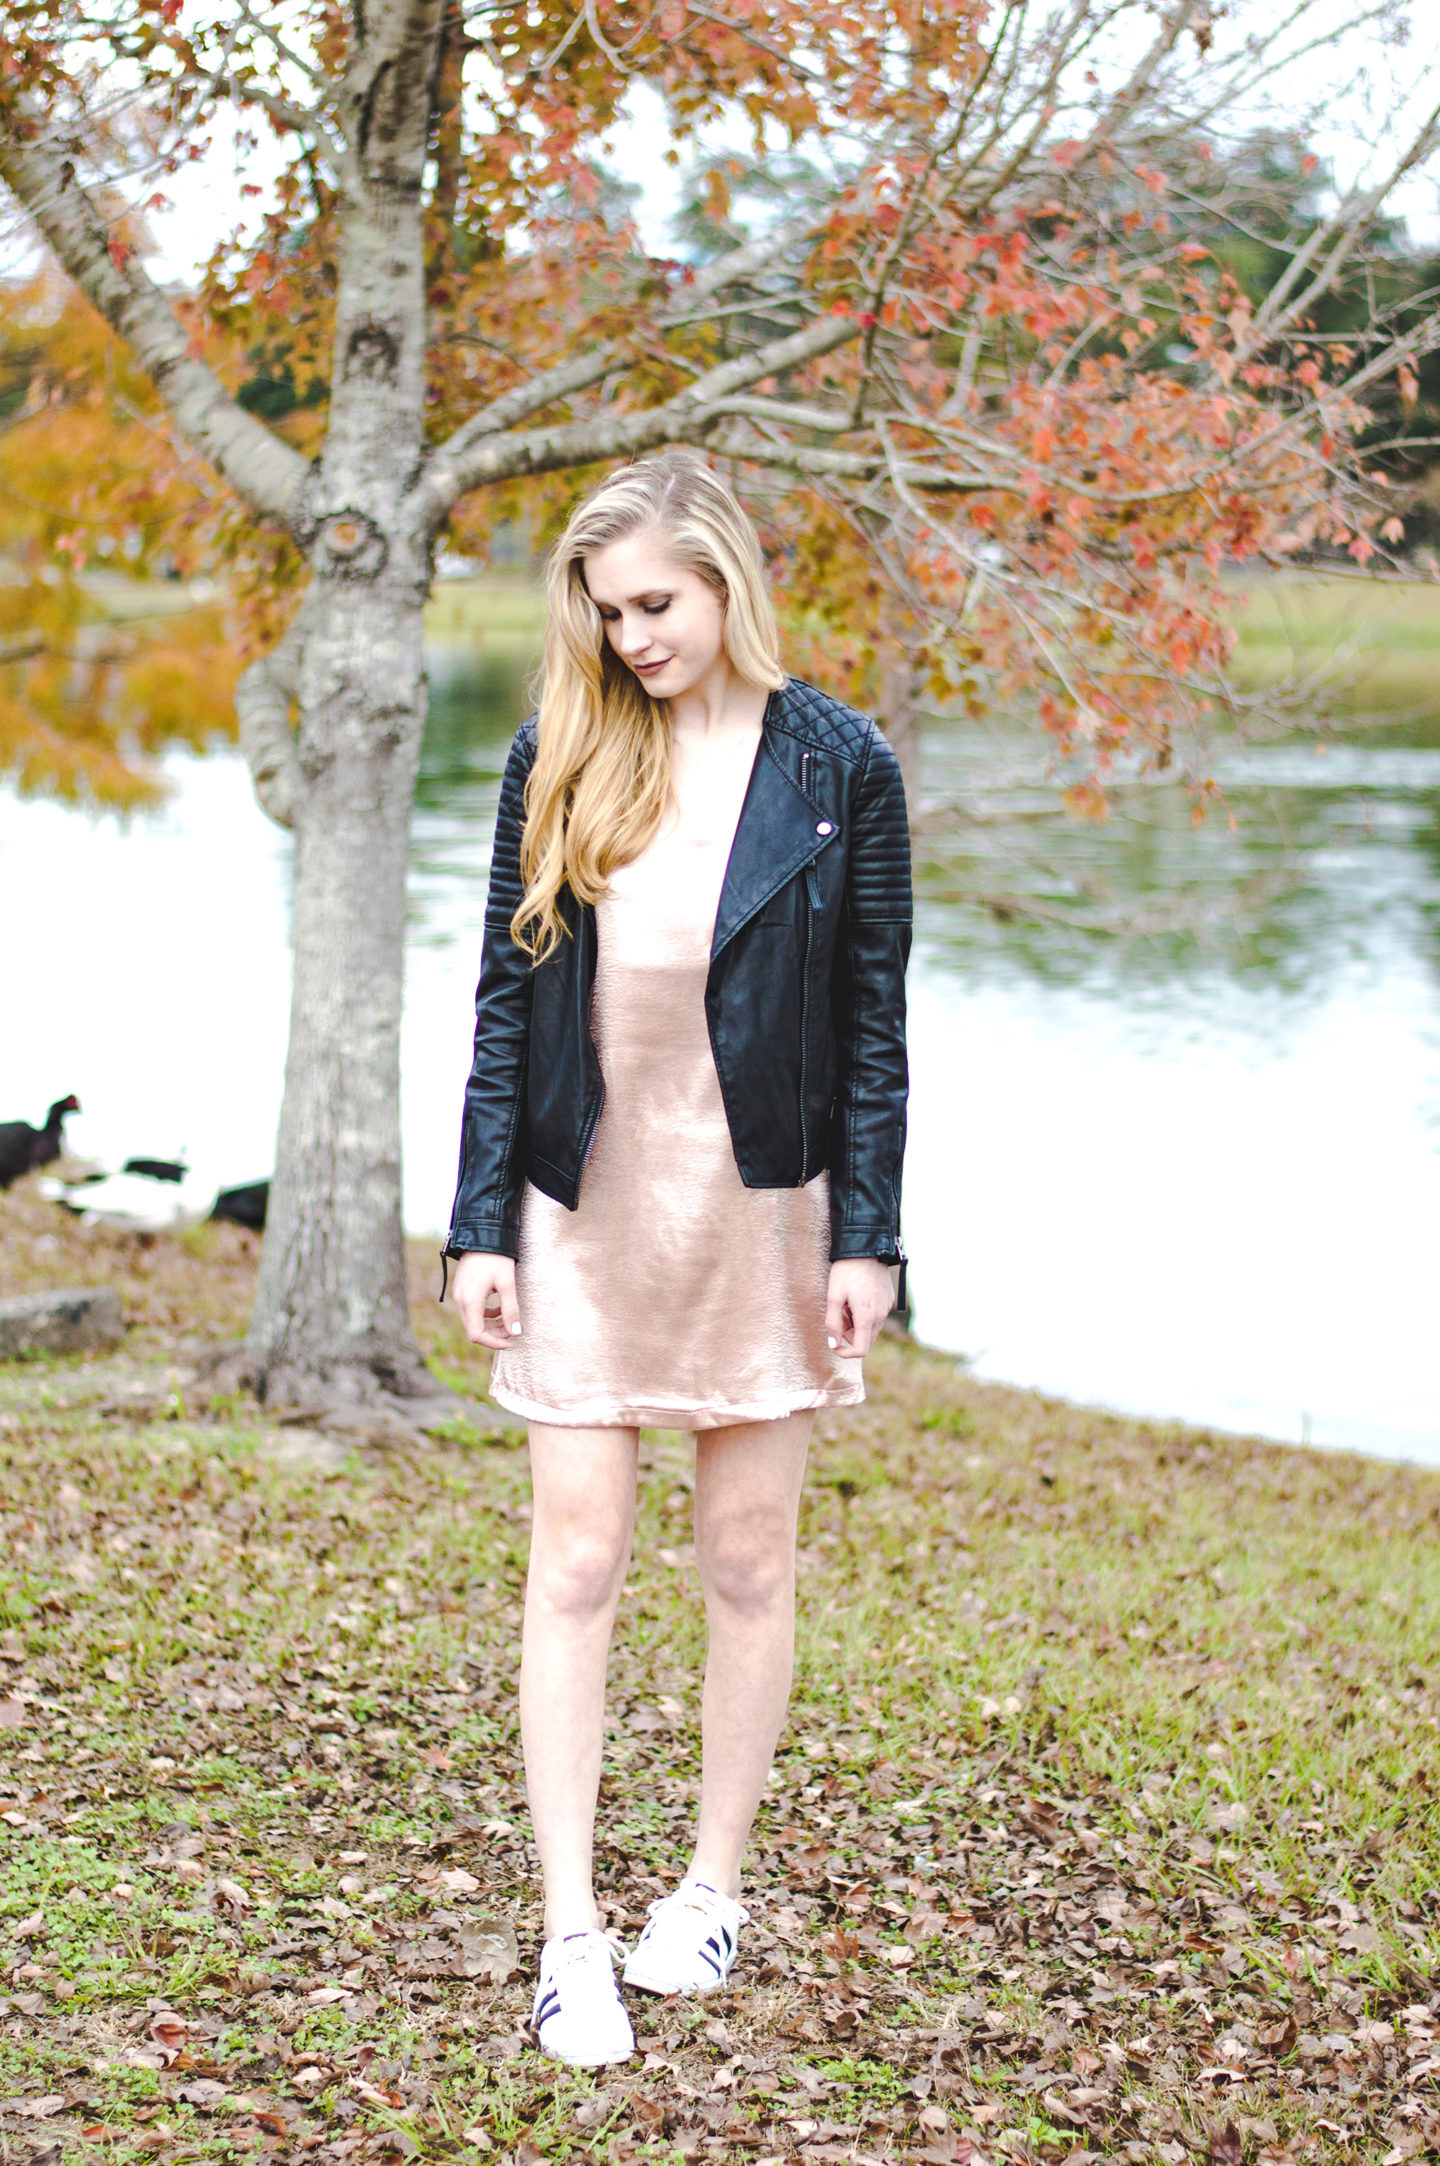 Channeling Cher Horowitz: Blush is the New Black